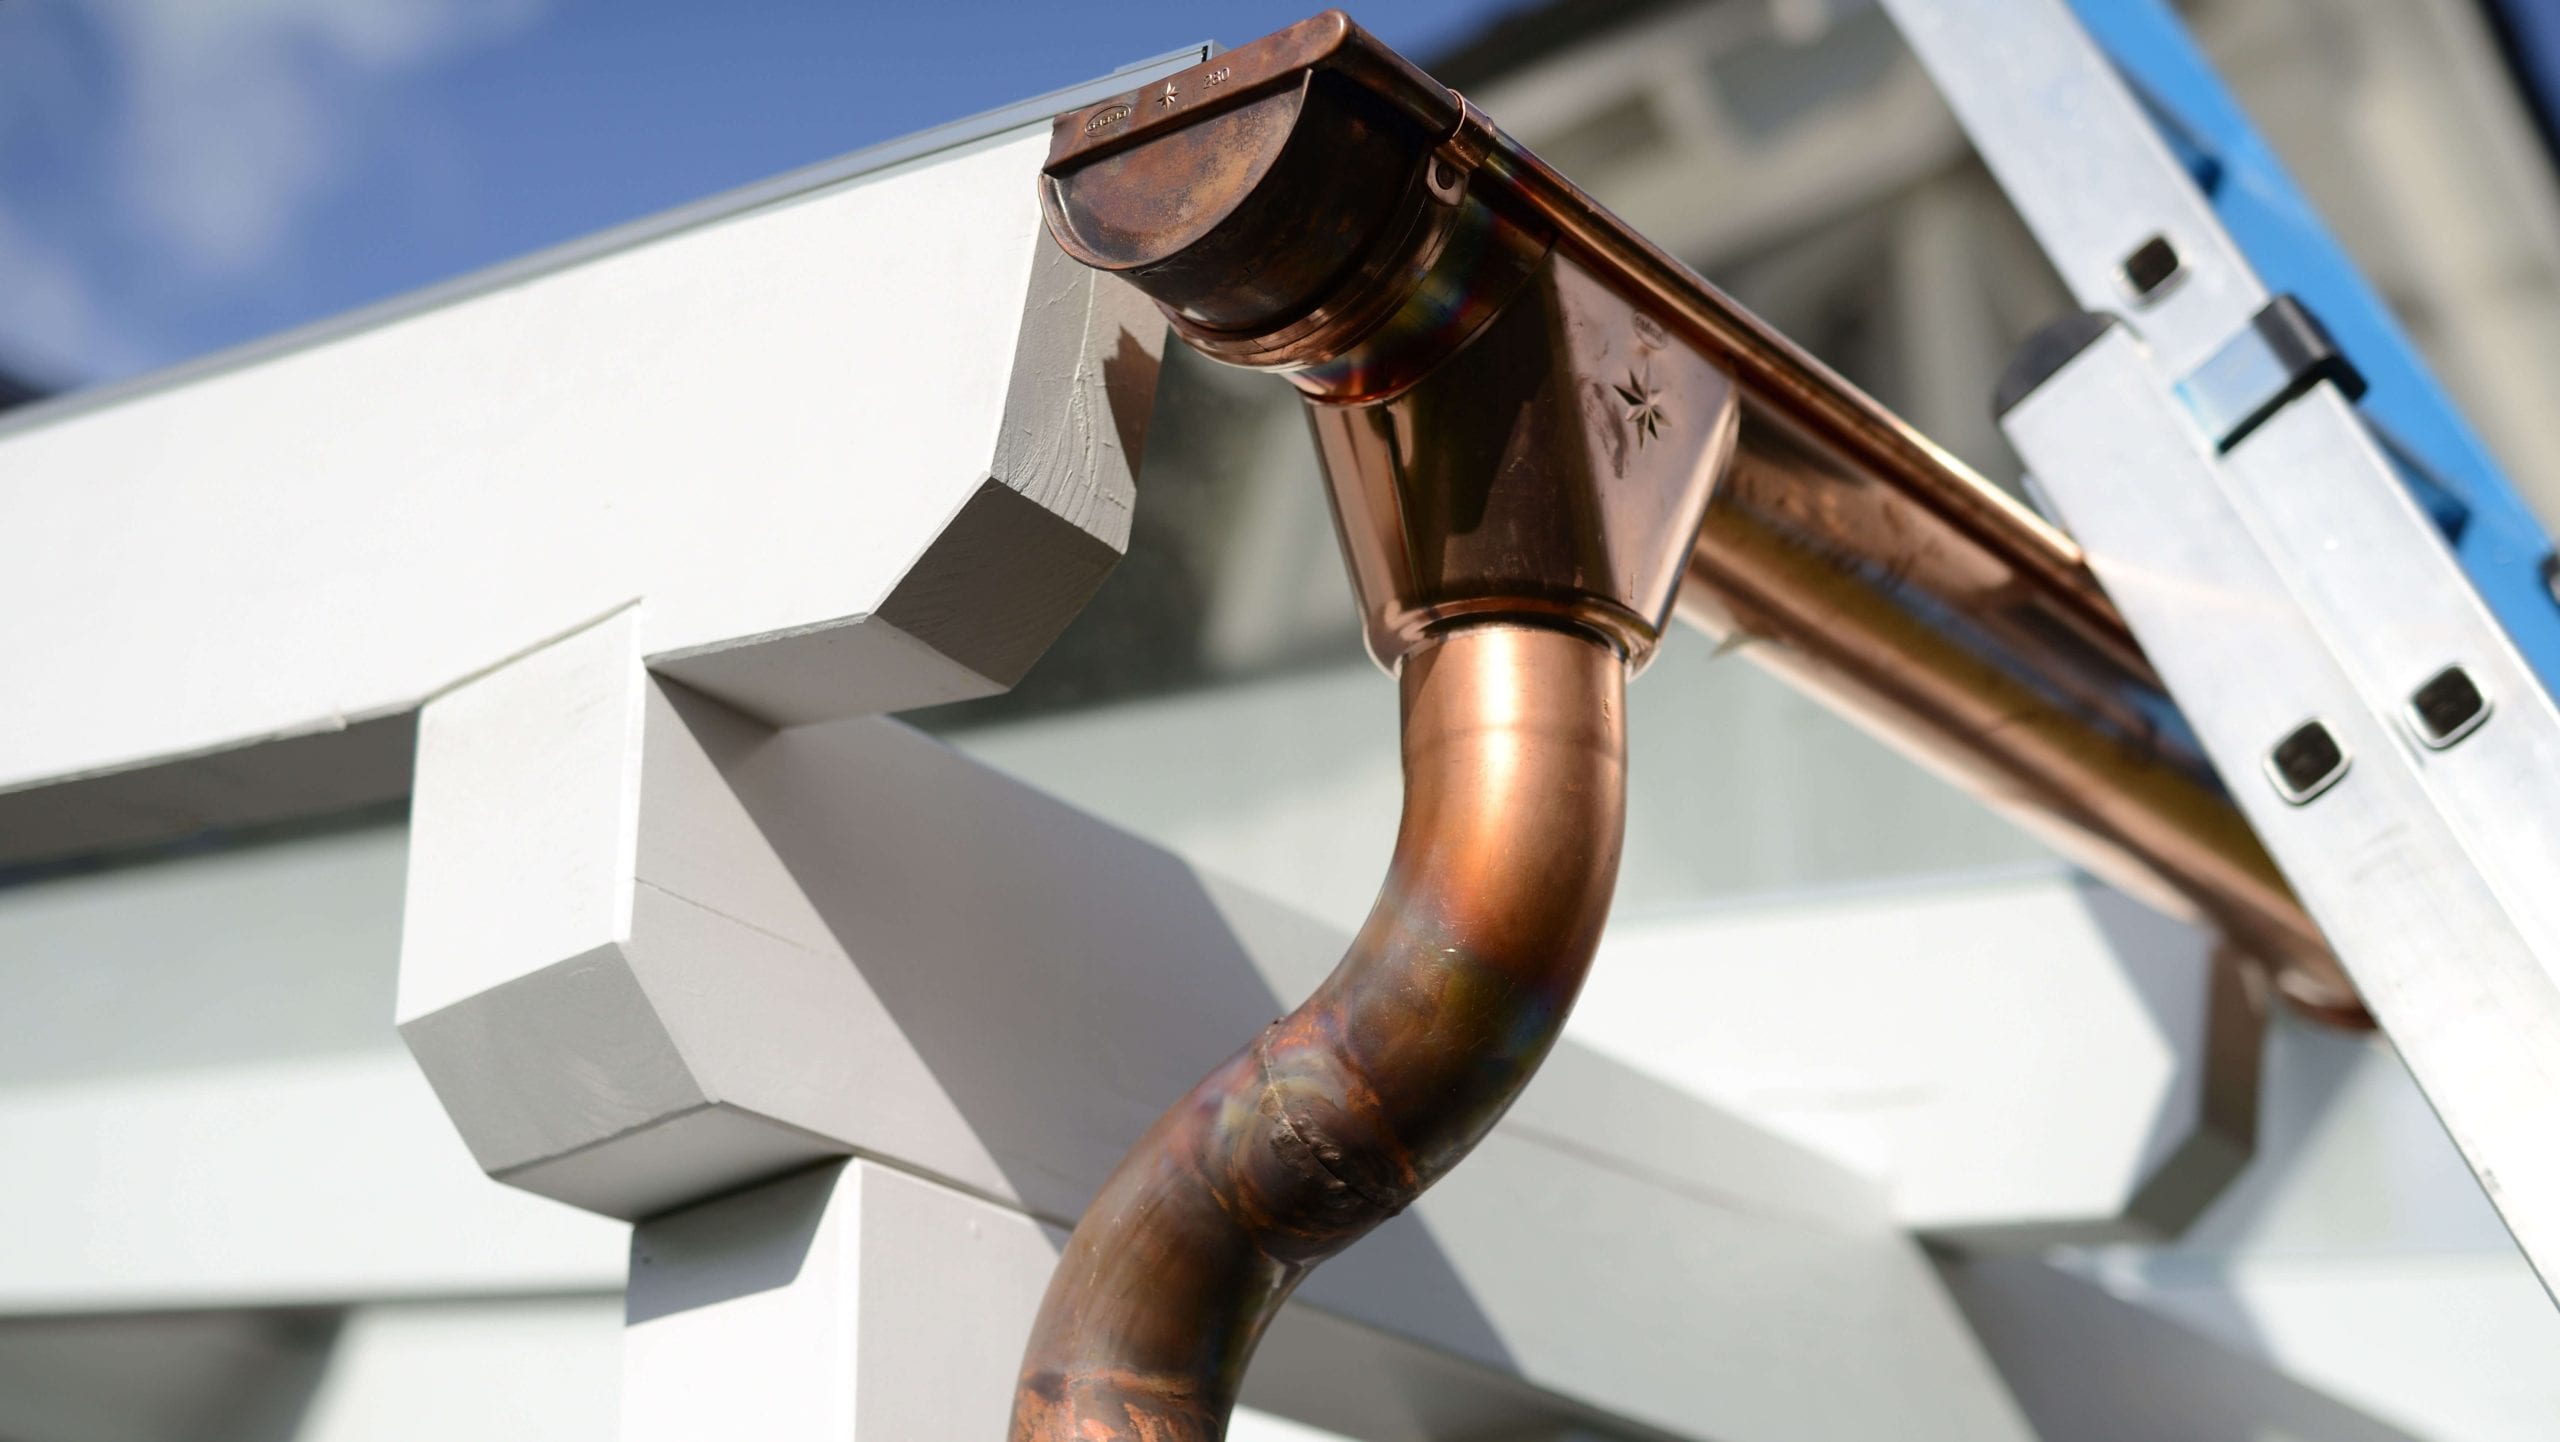 Make your property stand out with copper gutters. Contact for gutter installation in Burlington